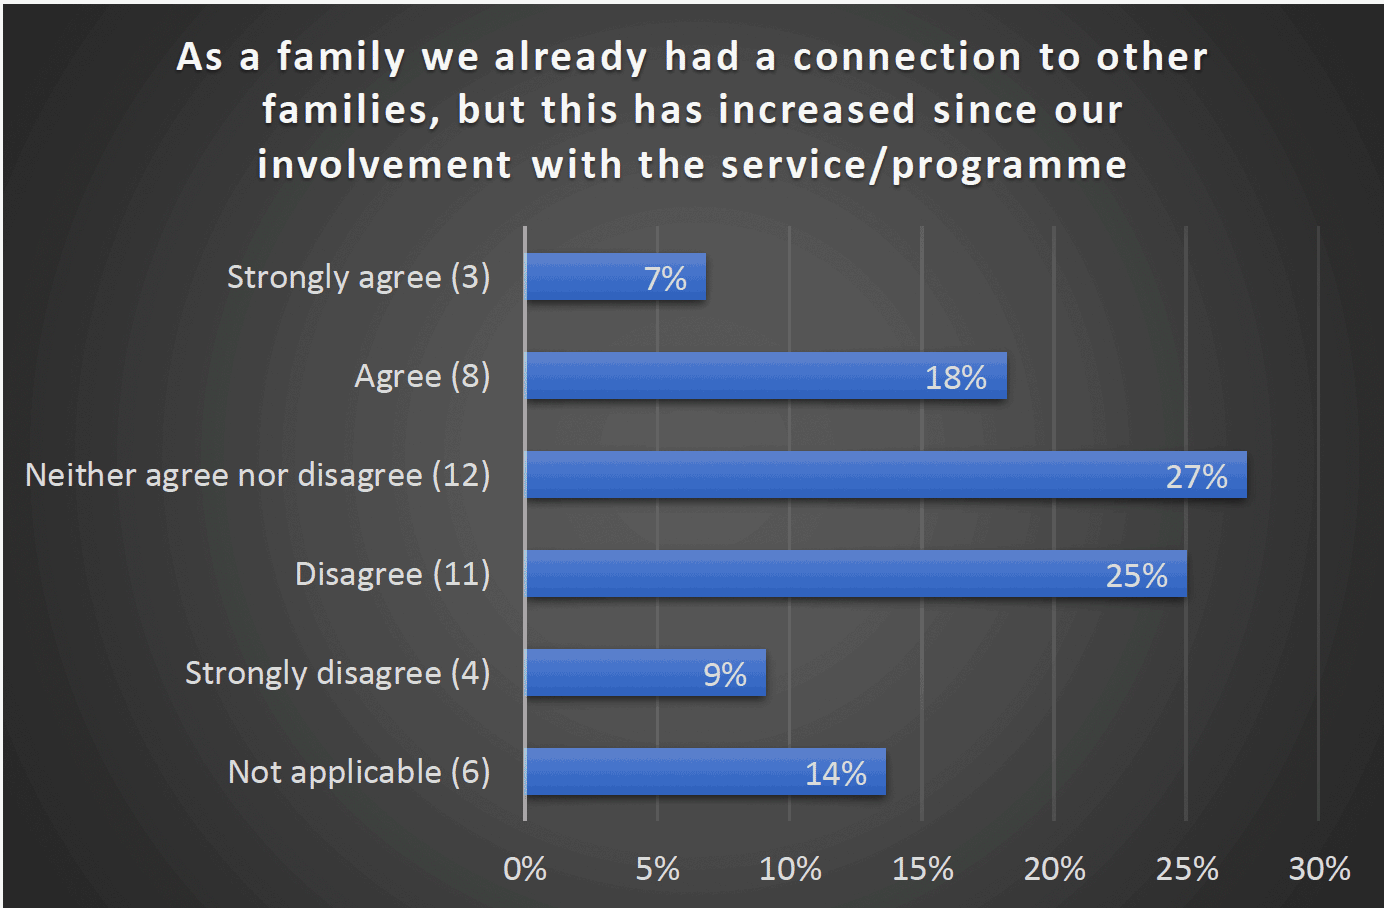 As a family we already had a connection to other families, but this has increased since our involvement with the service/programme - Strongly agree (3) 7%, Agree (8) 18%, Neither agree nor disagree (12) 27%, Disagree (11) 25%, Strongly disagree (4) 9%, Not applicable (6) 14%